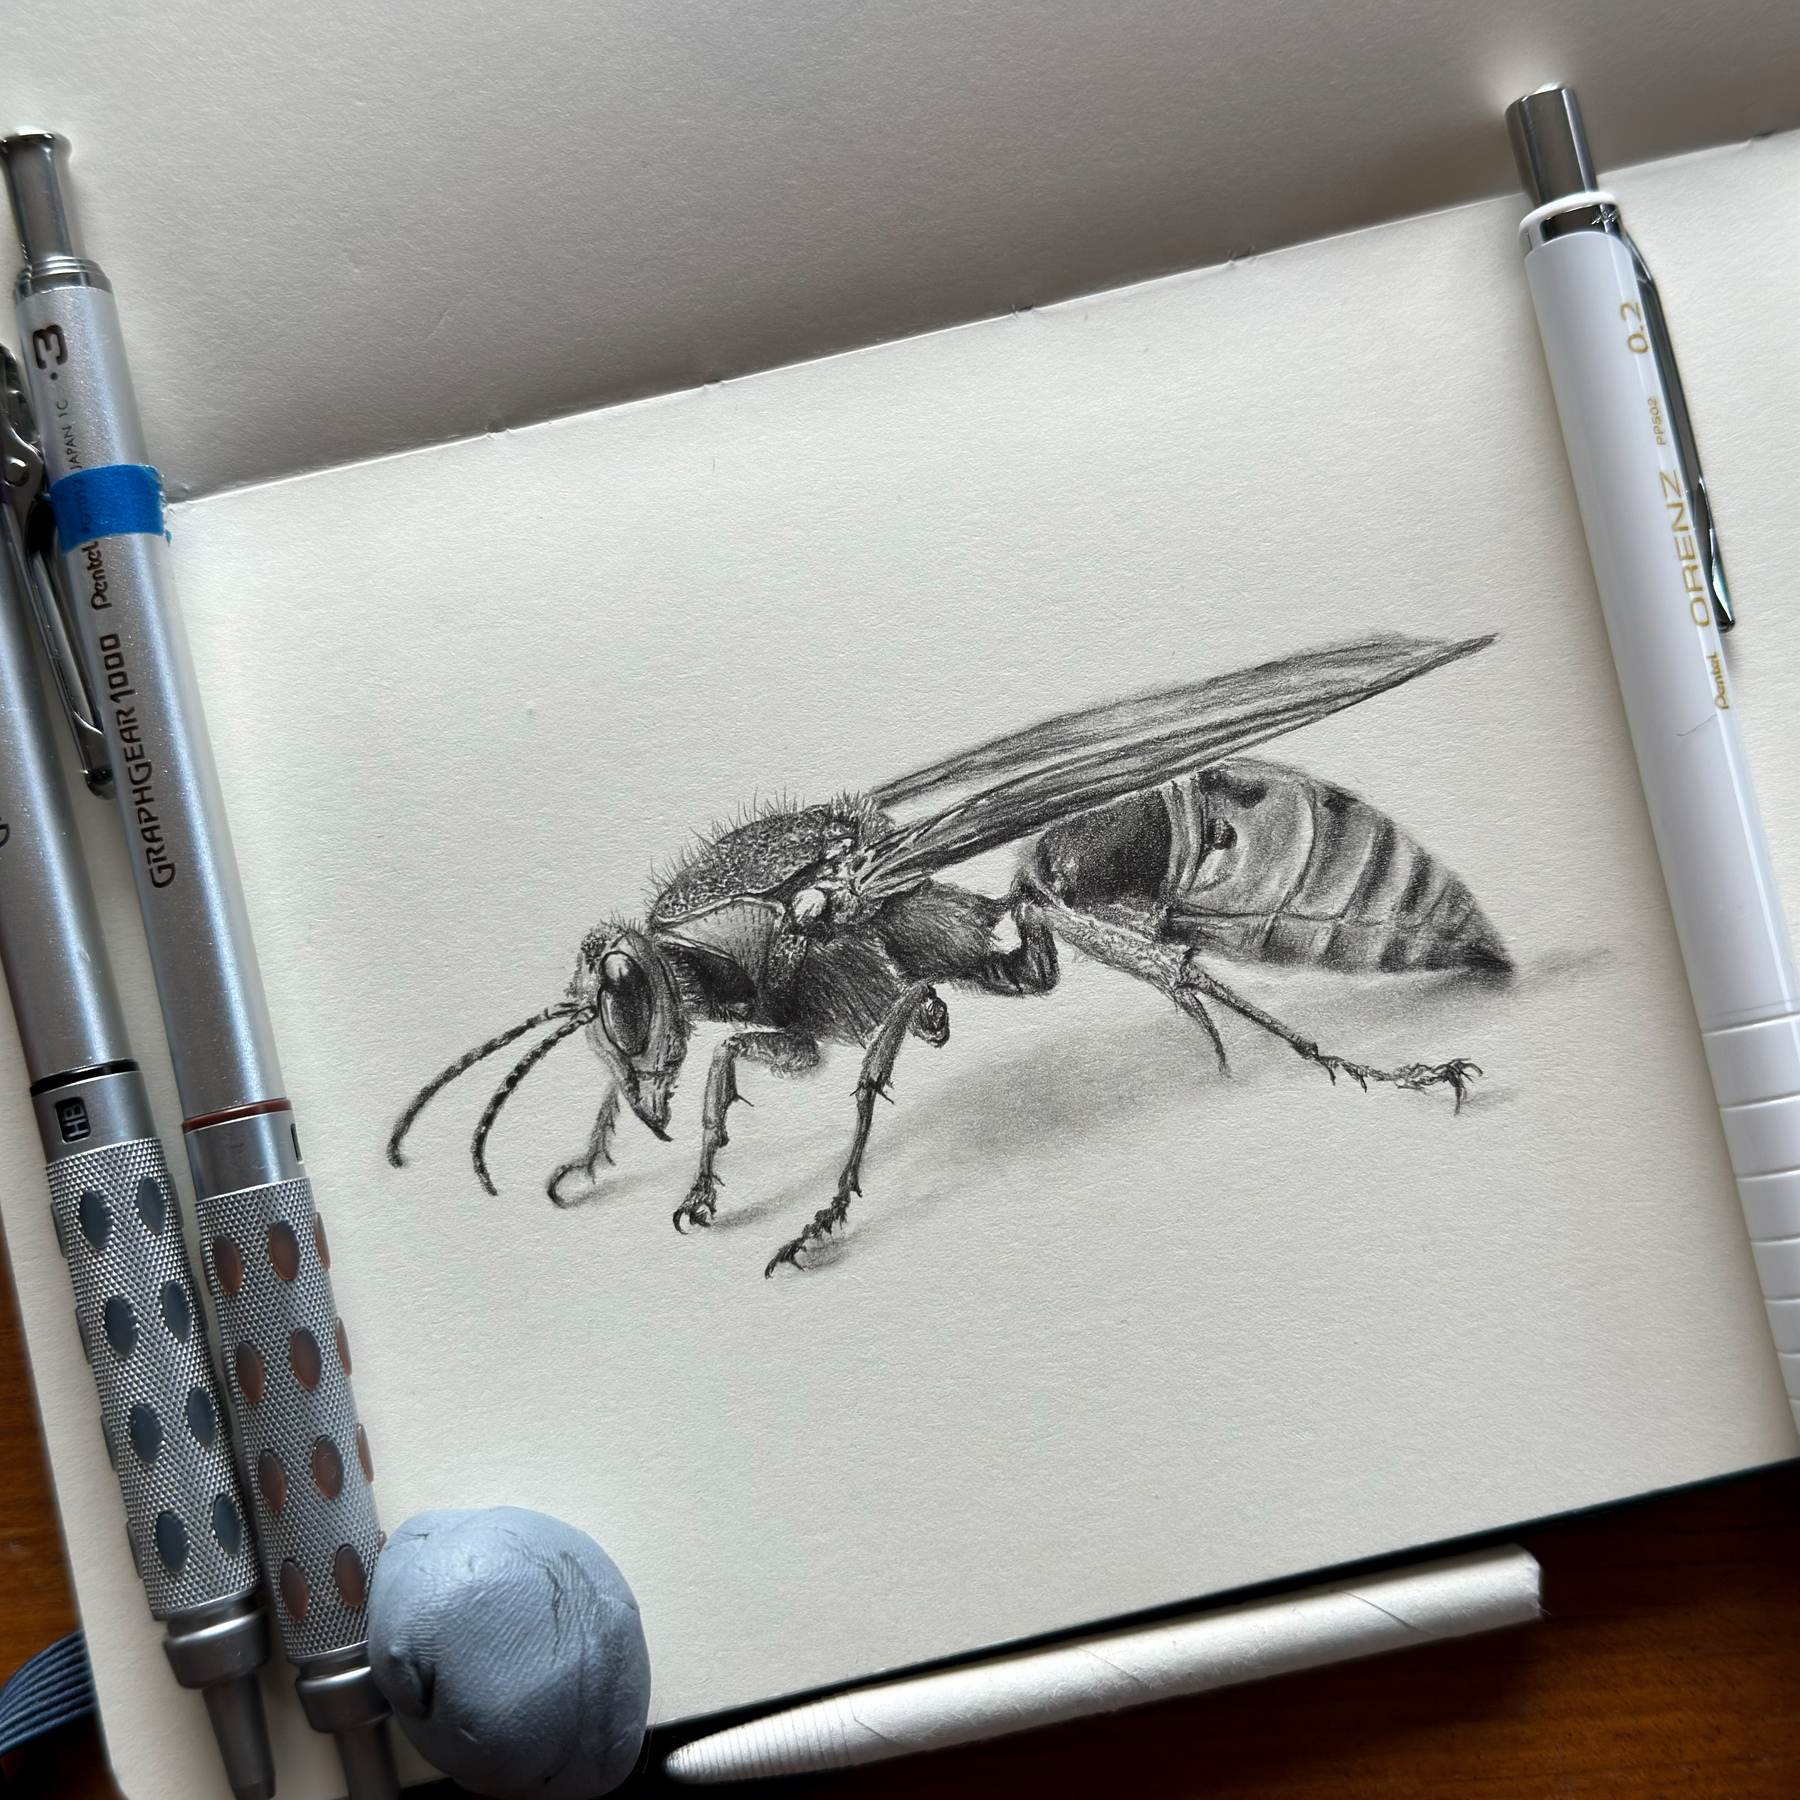 A detailed pencil sketch of a giant hornet is drawn on a white paper, surrounded by mechanical pencils and an eraser.